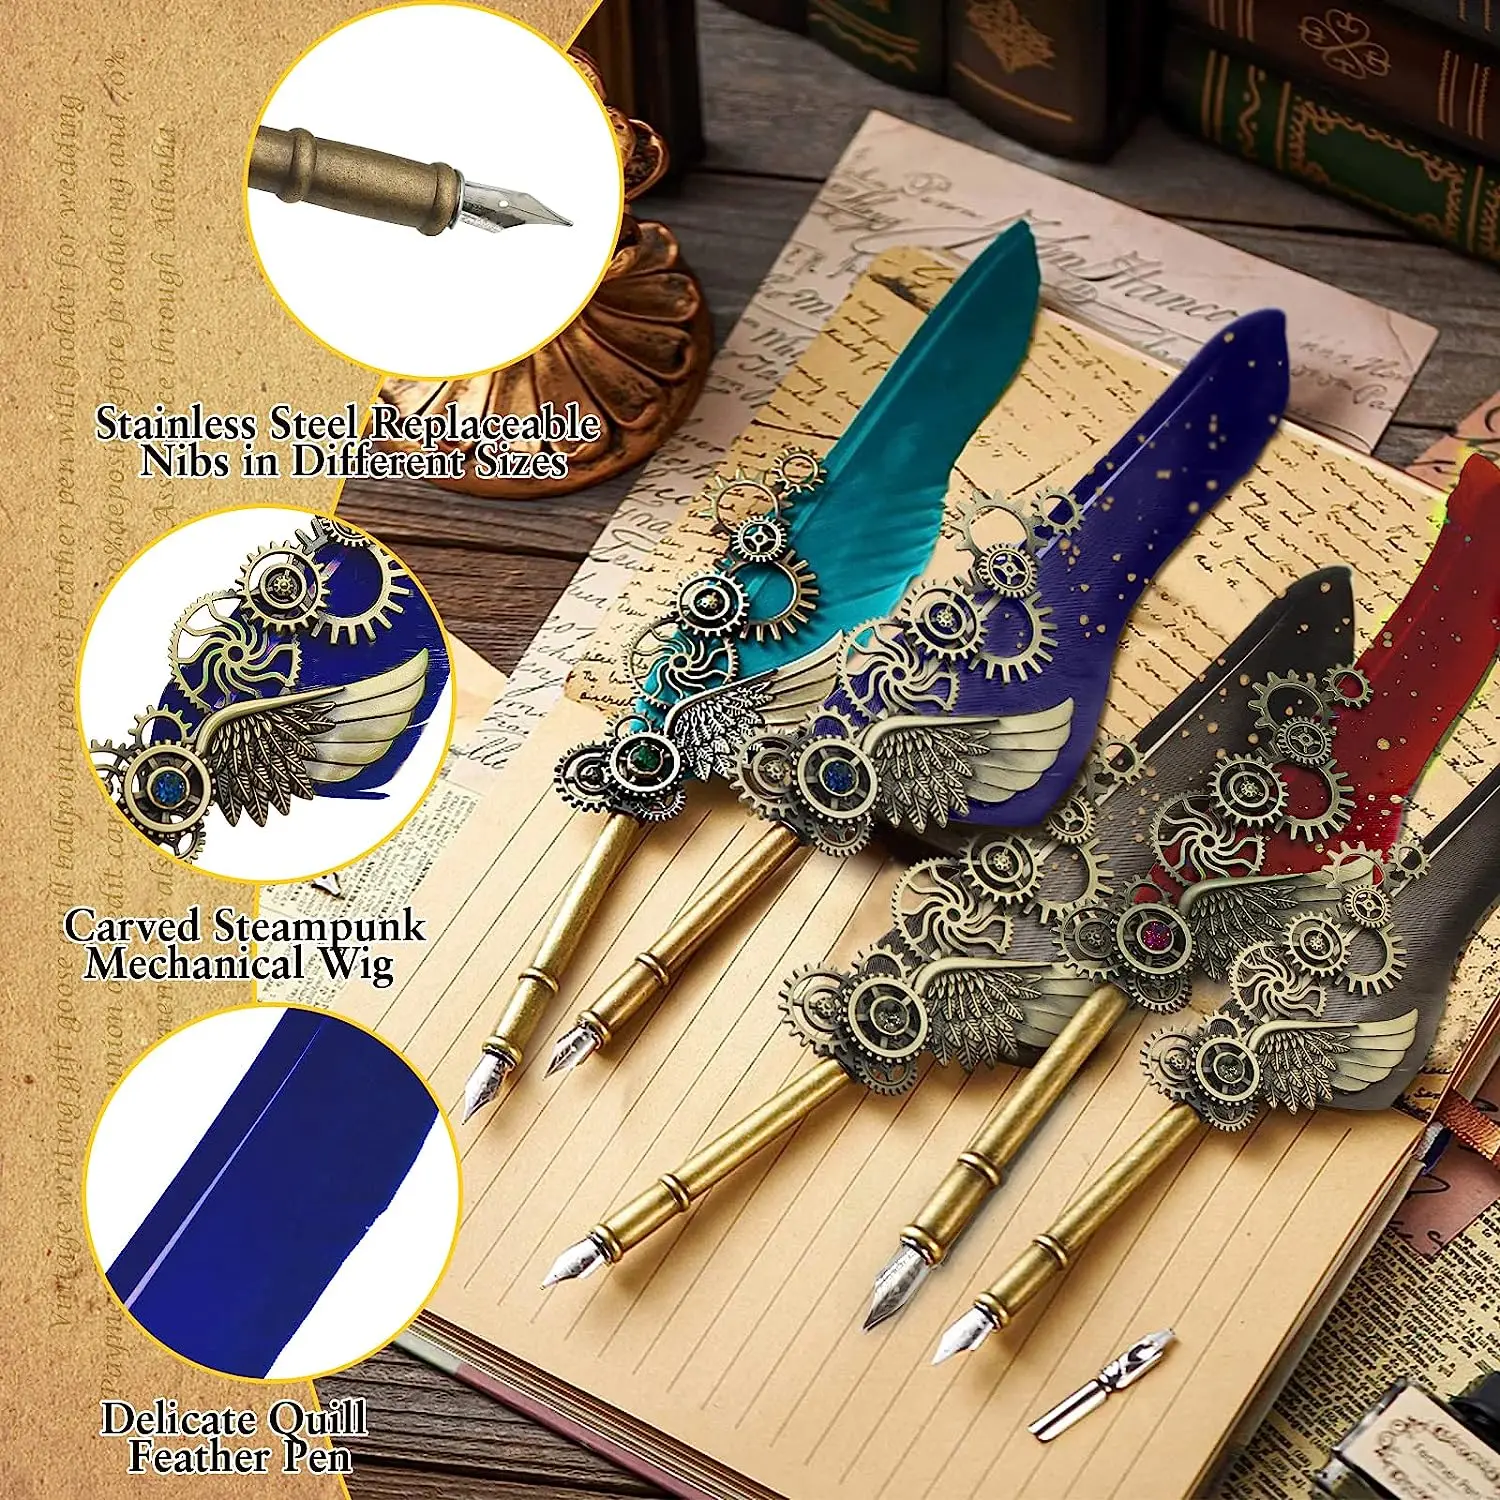 Xinyiart Calligraphy Pen and Ink Set Antique Writing Quill Ink Dip Feather Pens With Replacement Pen Tips